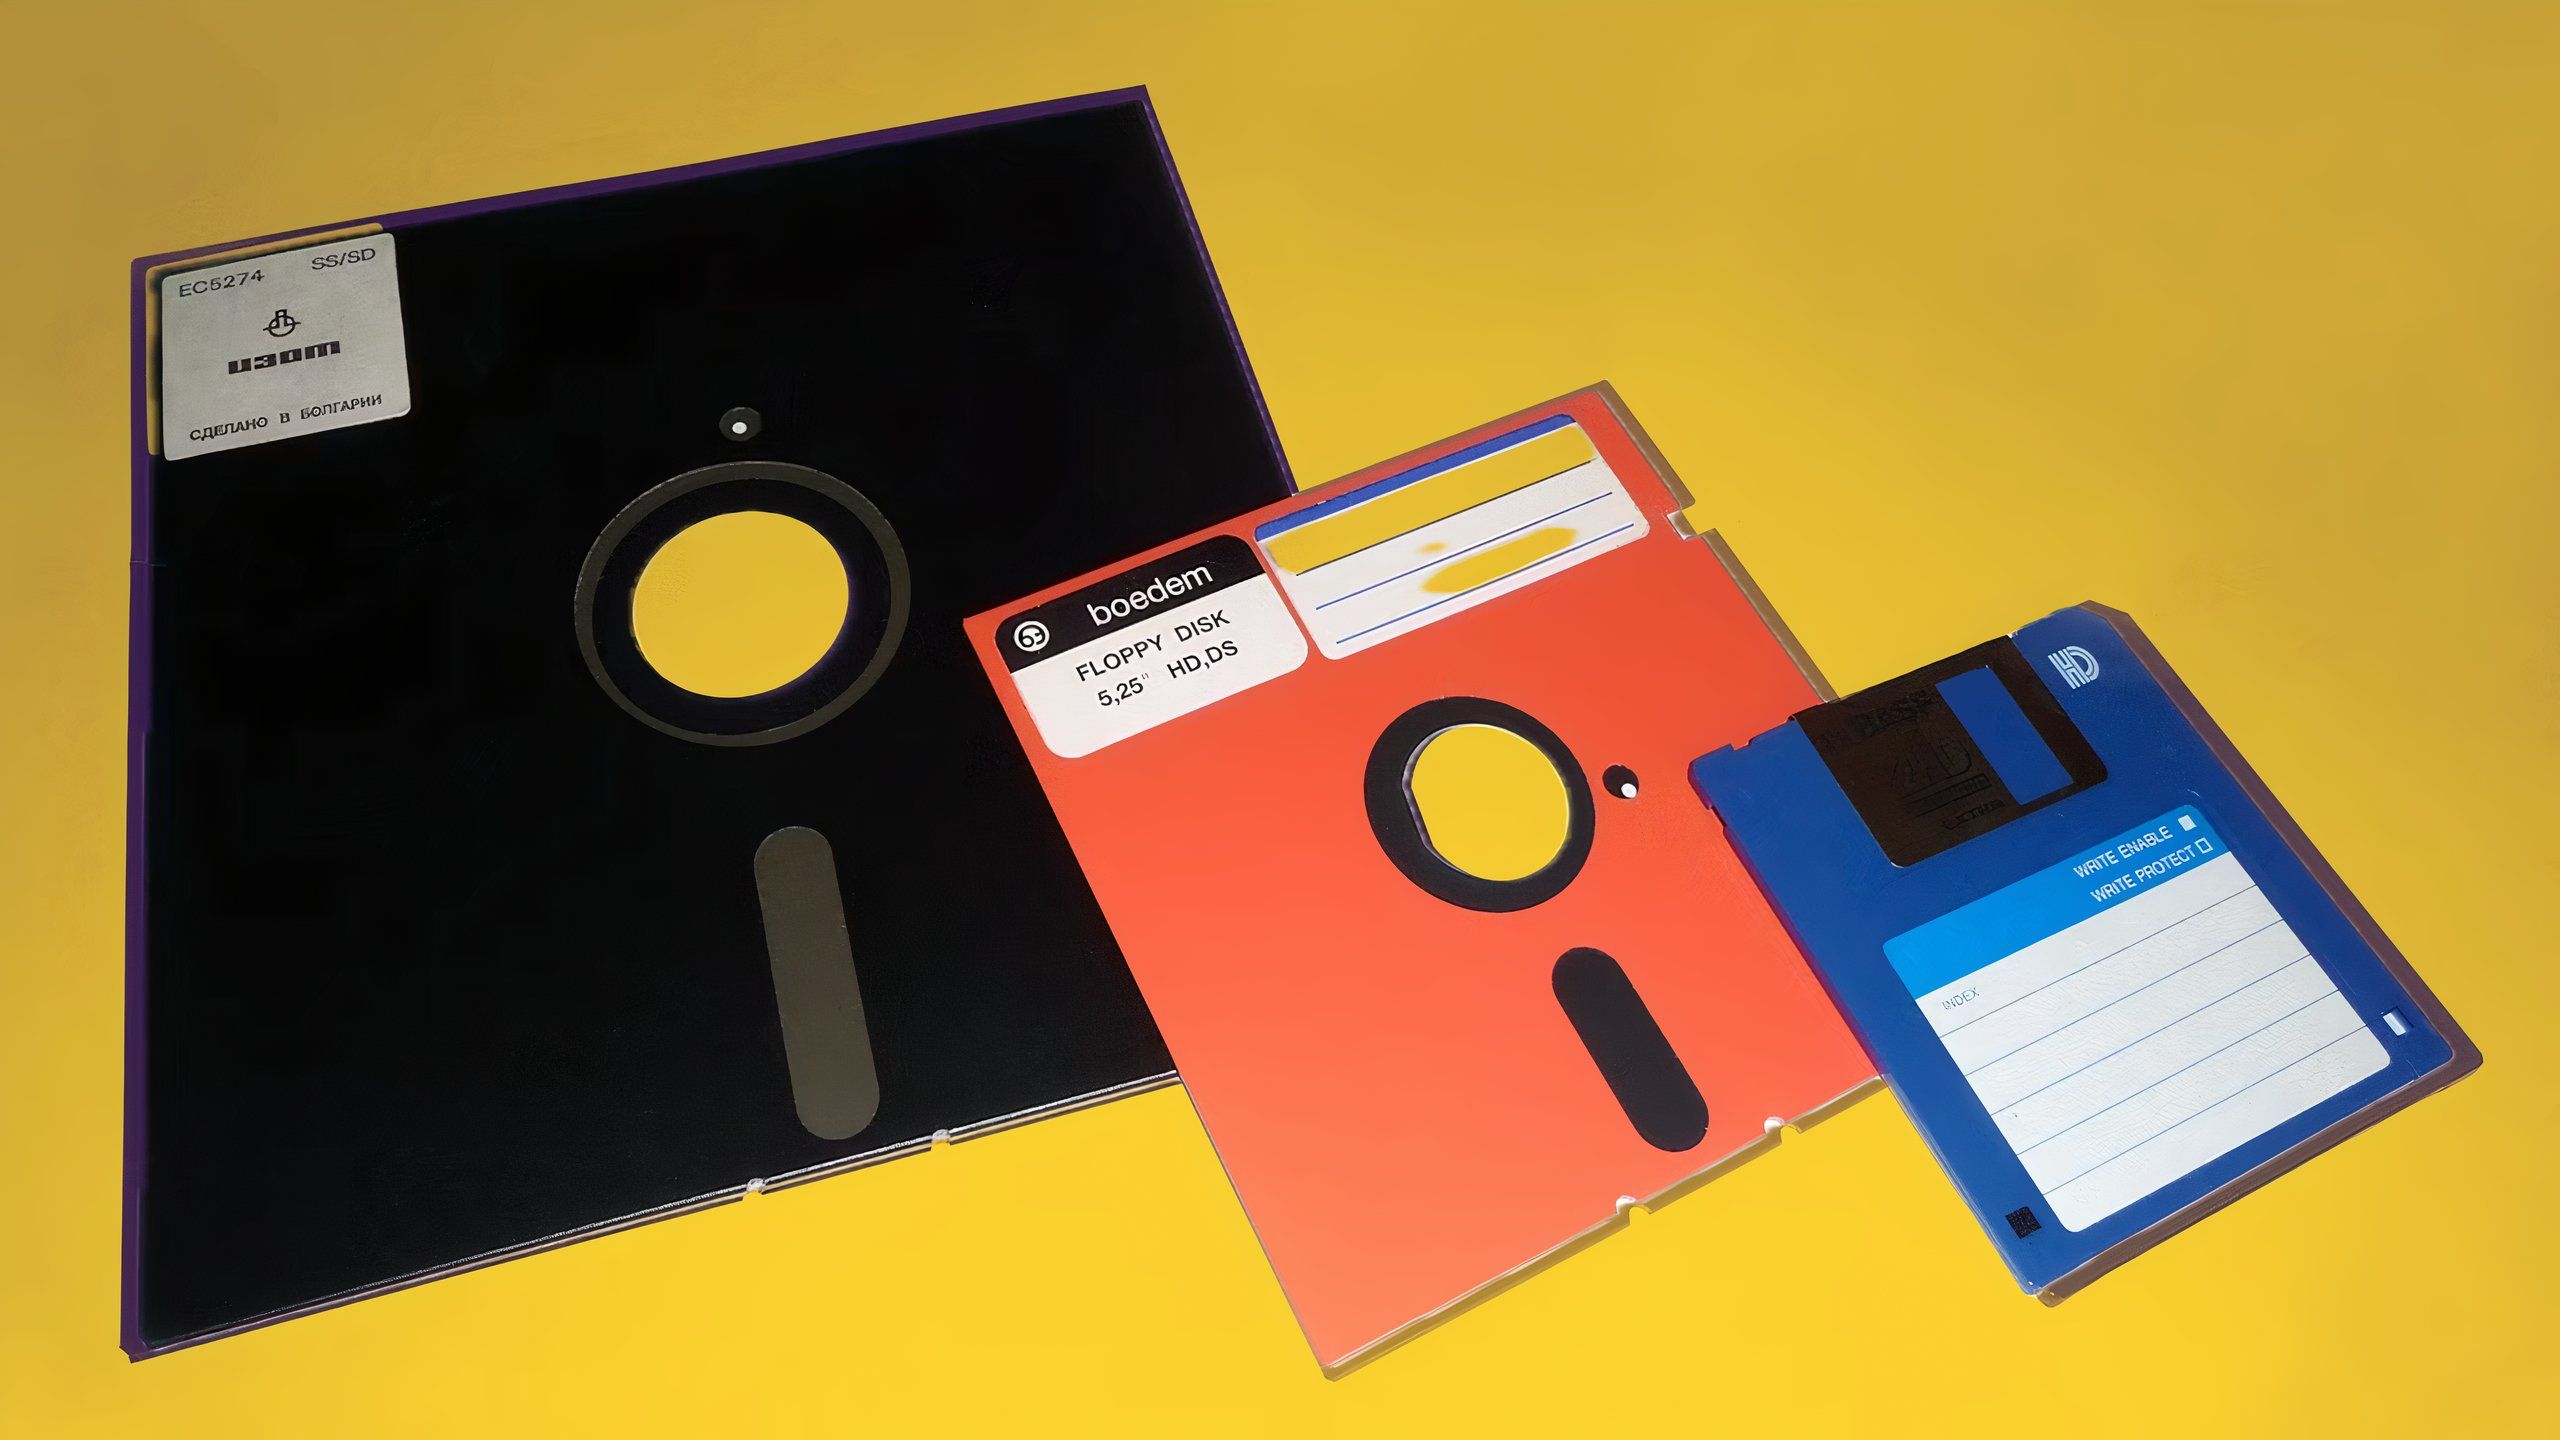 floppy disks laying together